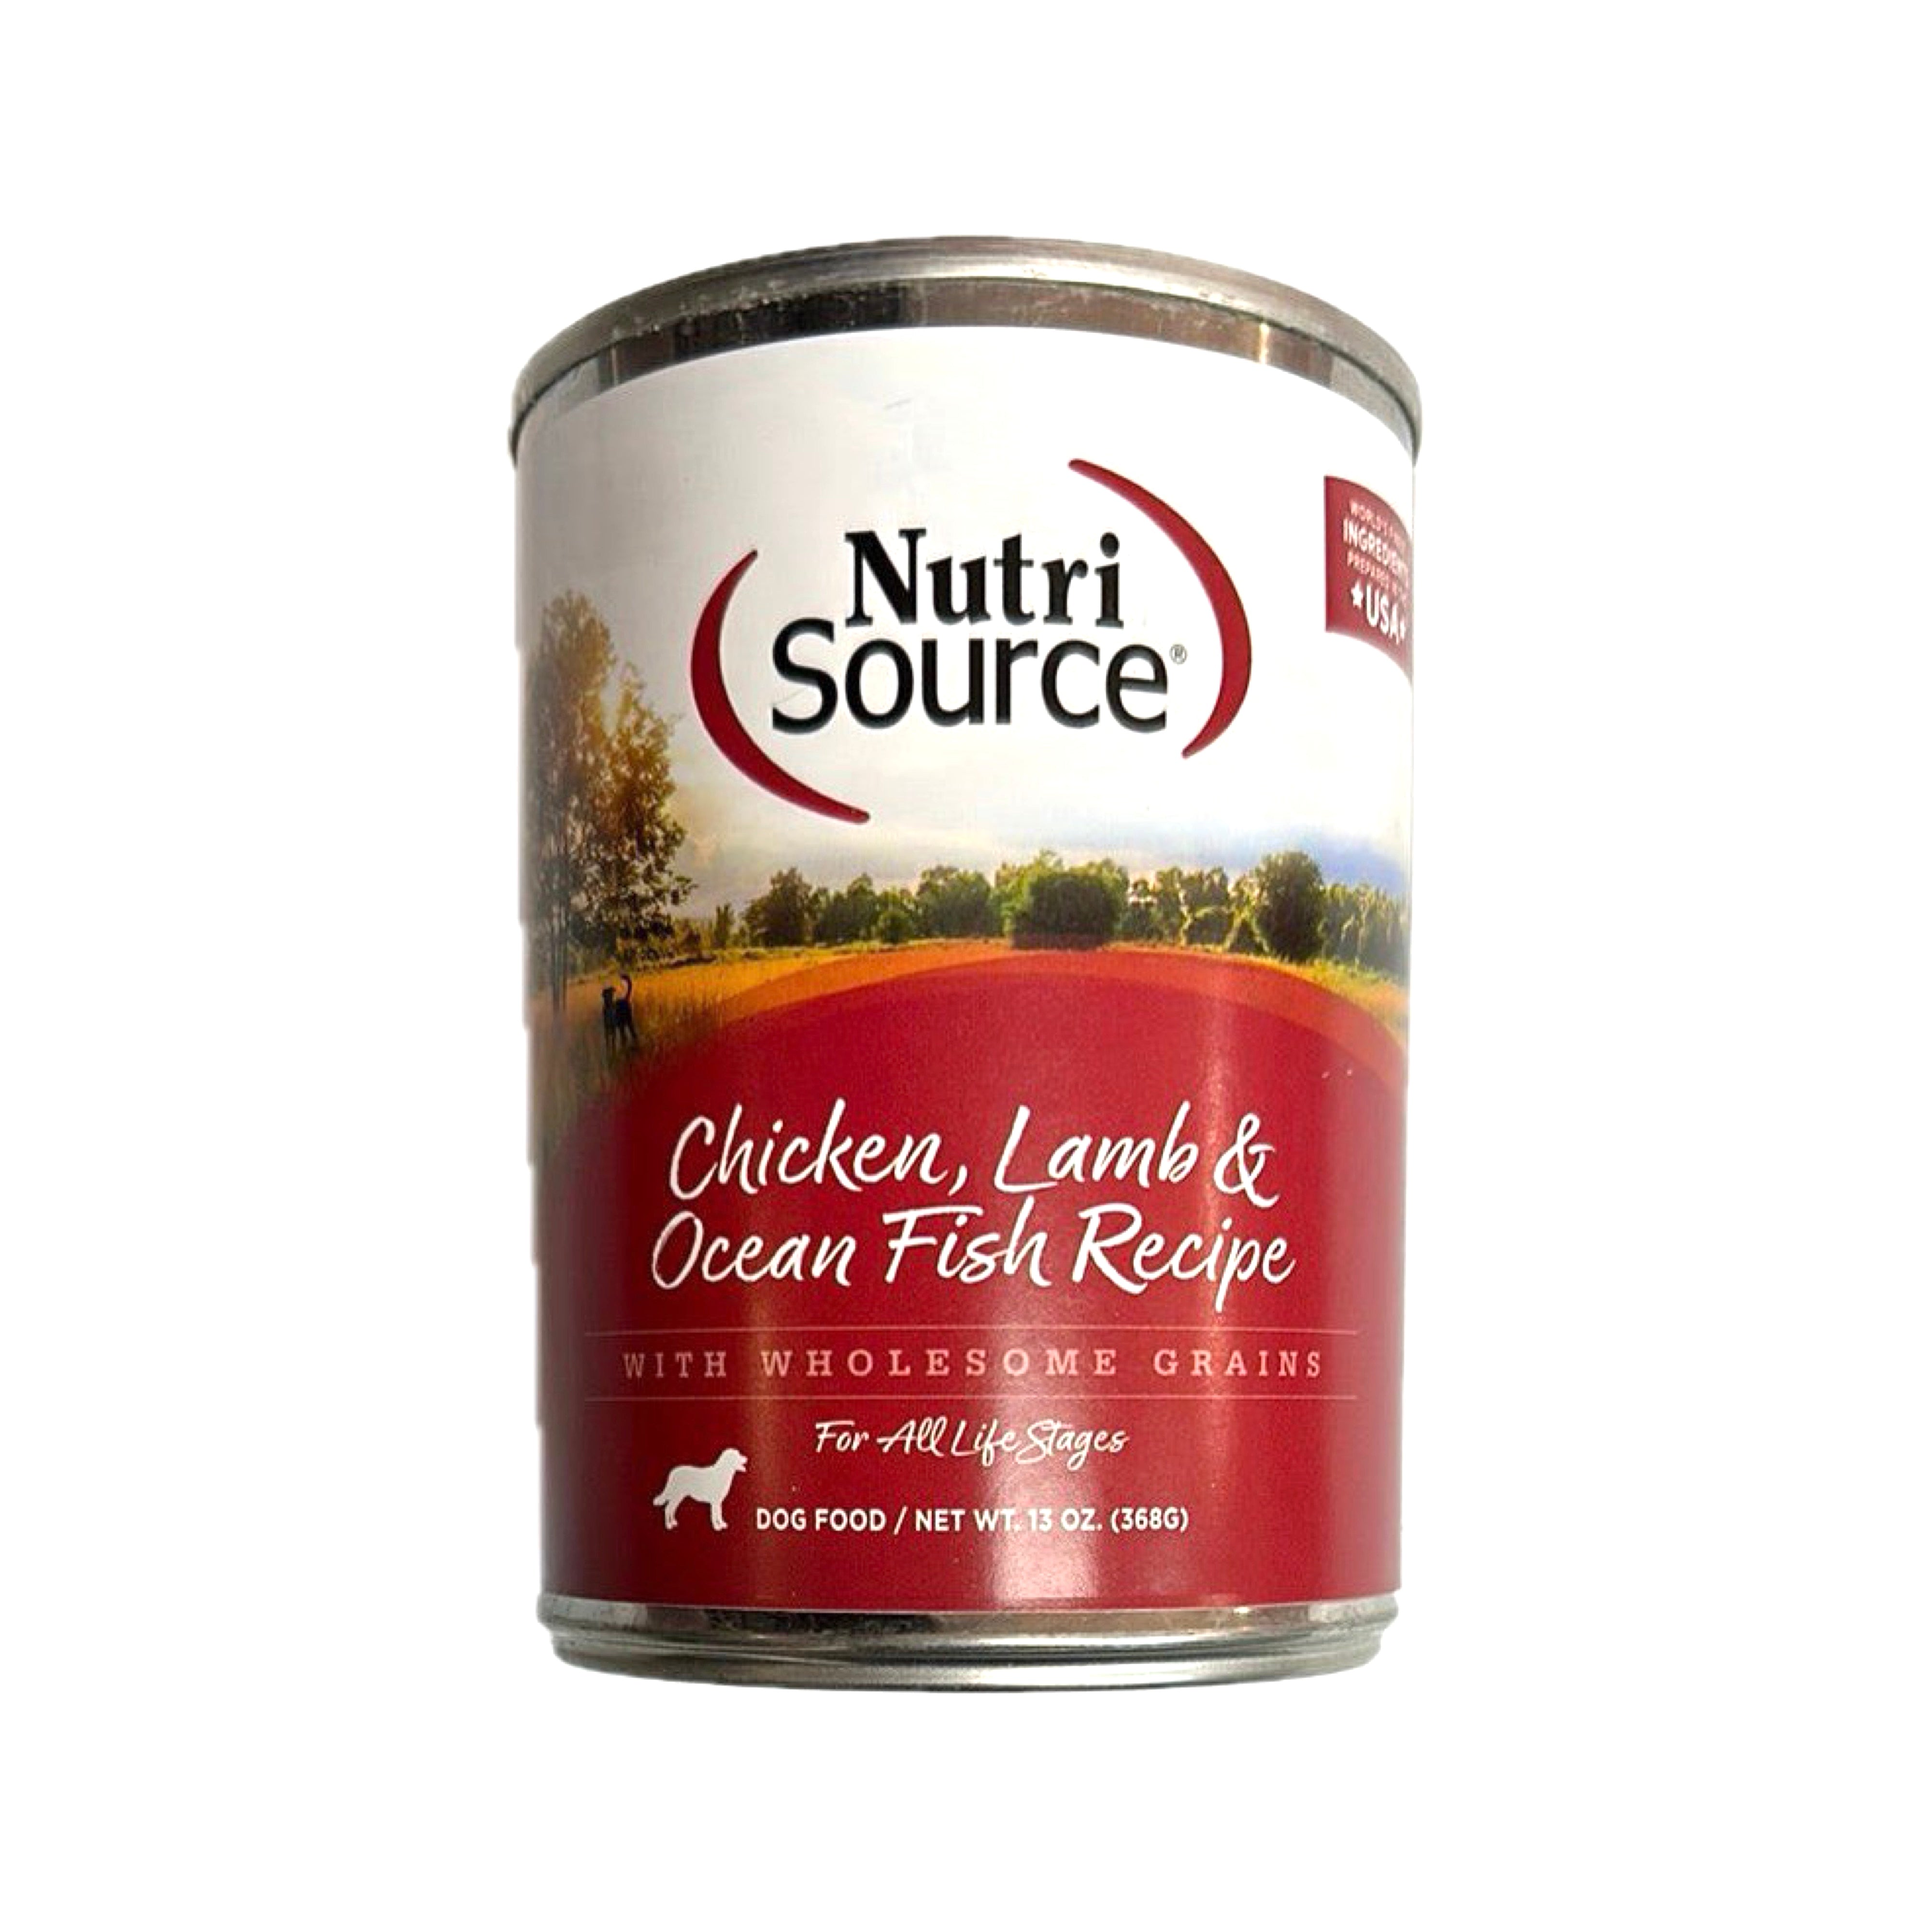 NutriSource Chicken, Lamb & Ocean Fish Recipe with Wholesome Grains Canned Dog Food